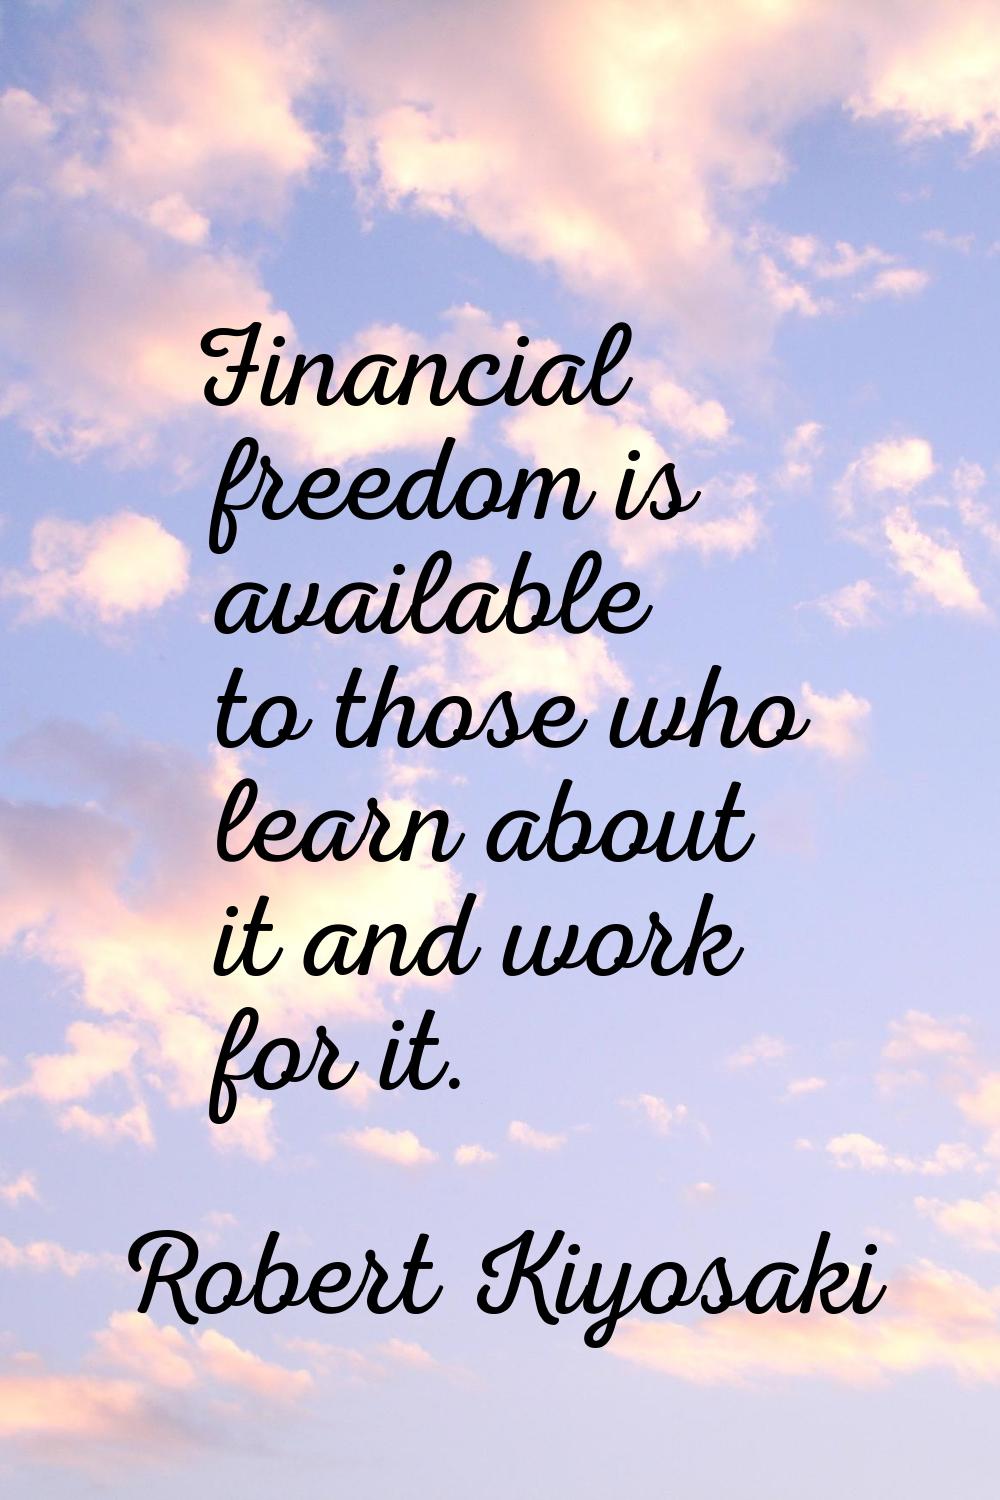 Financial freedom is available to those who learn about it and work for it.